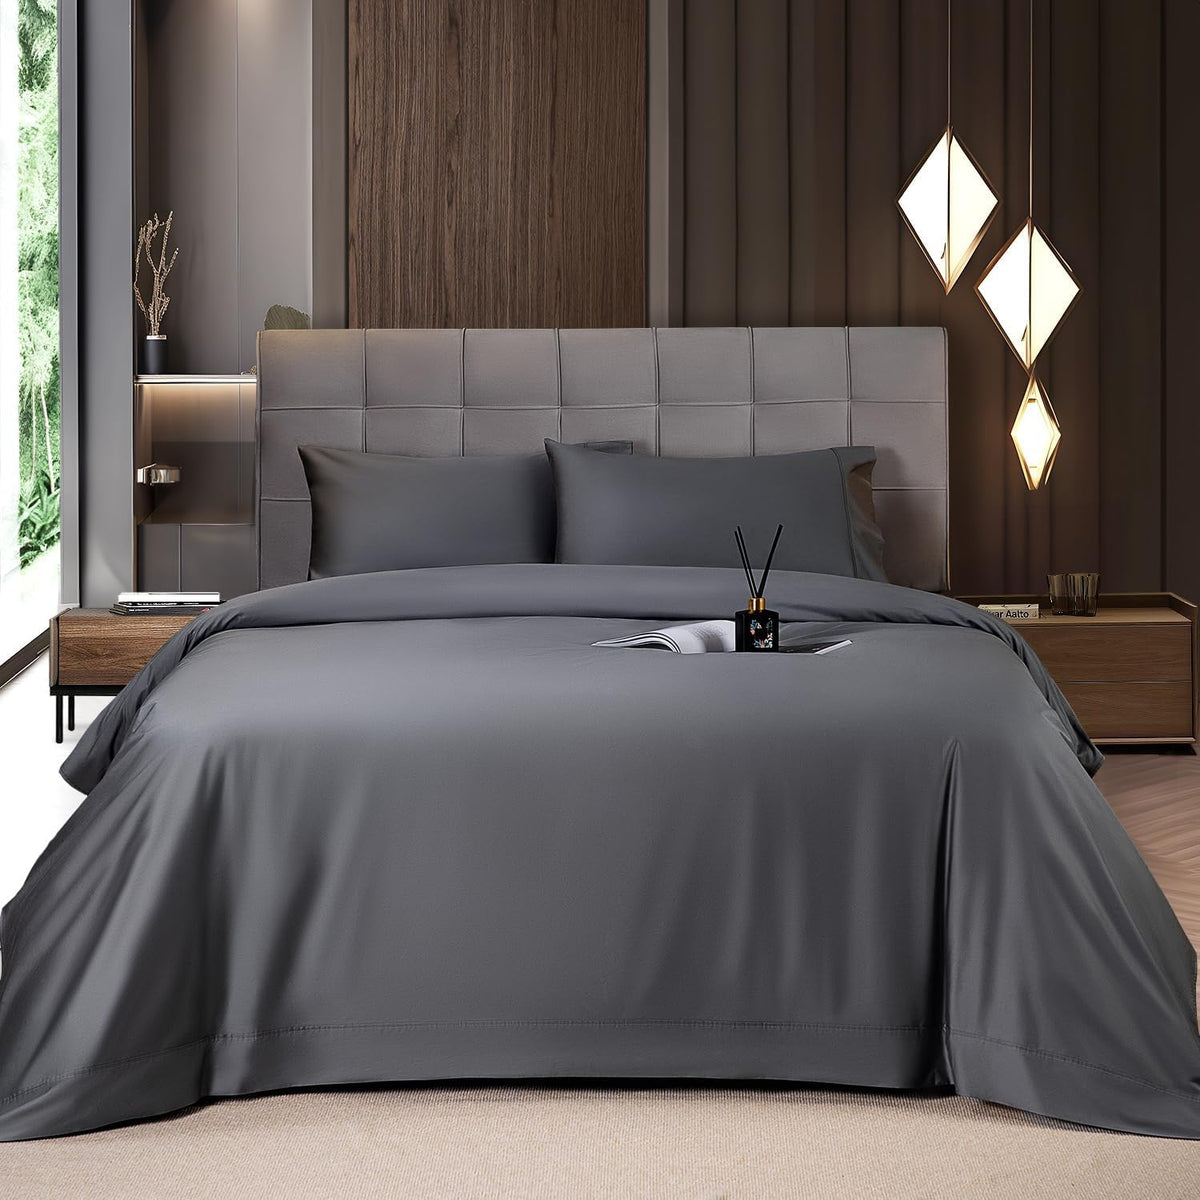 Mush 100% Bamboo Bedsheet for King Size bed with 2 Pillow covers | Luxuriously Soft, Breathable and Naturally Anti Microbial Thermoregulating Bed sheet 400TC (Charcoal Grey)